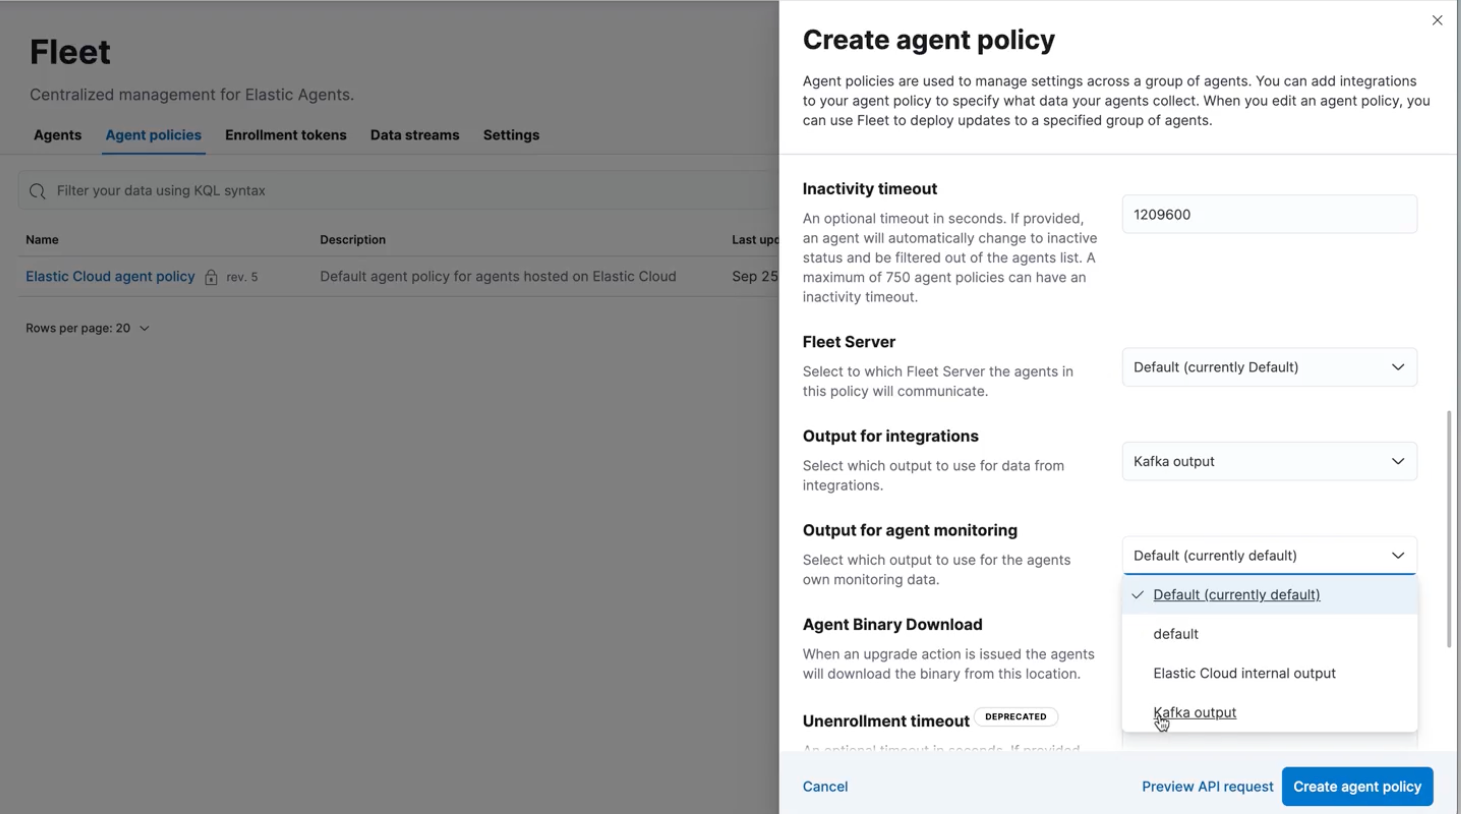 3 - create agent policy